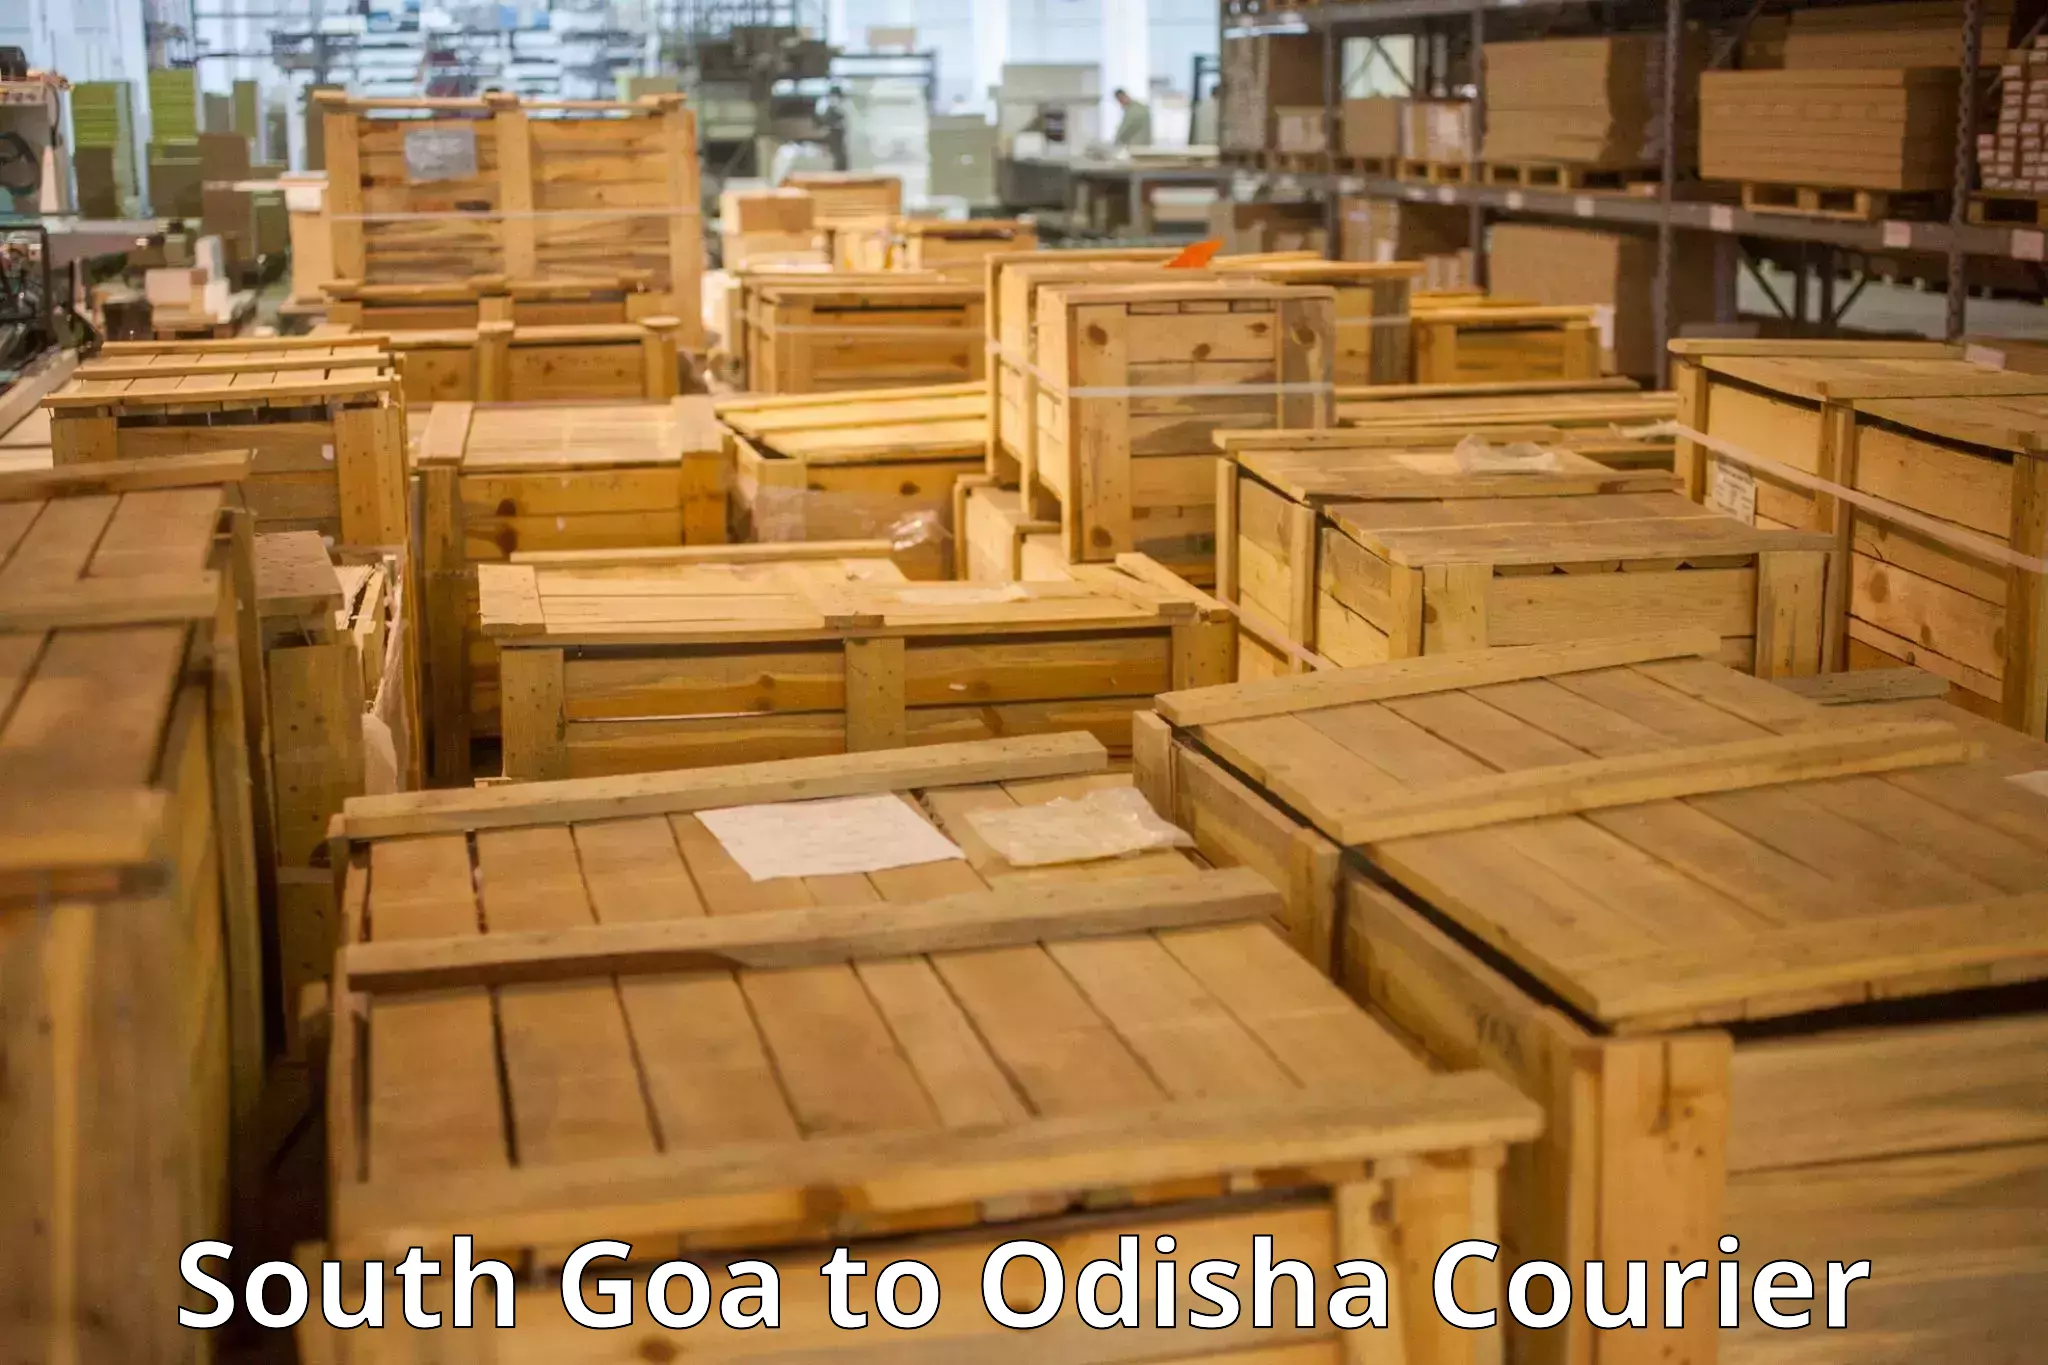 Baggage transport management South Goa to Joda